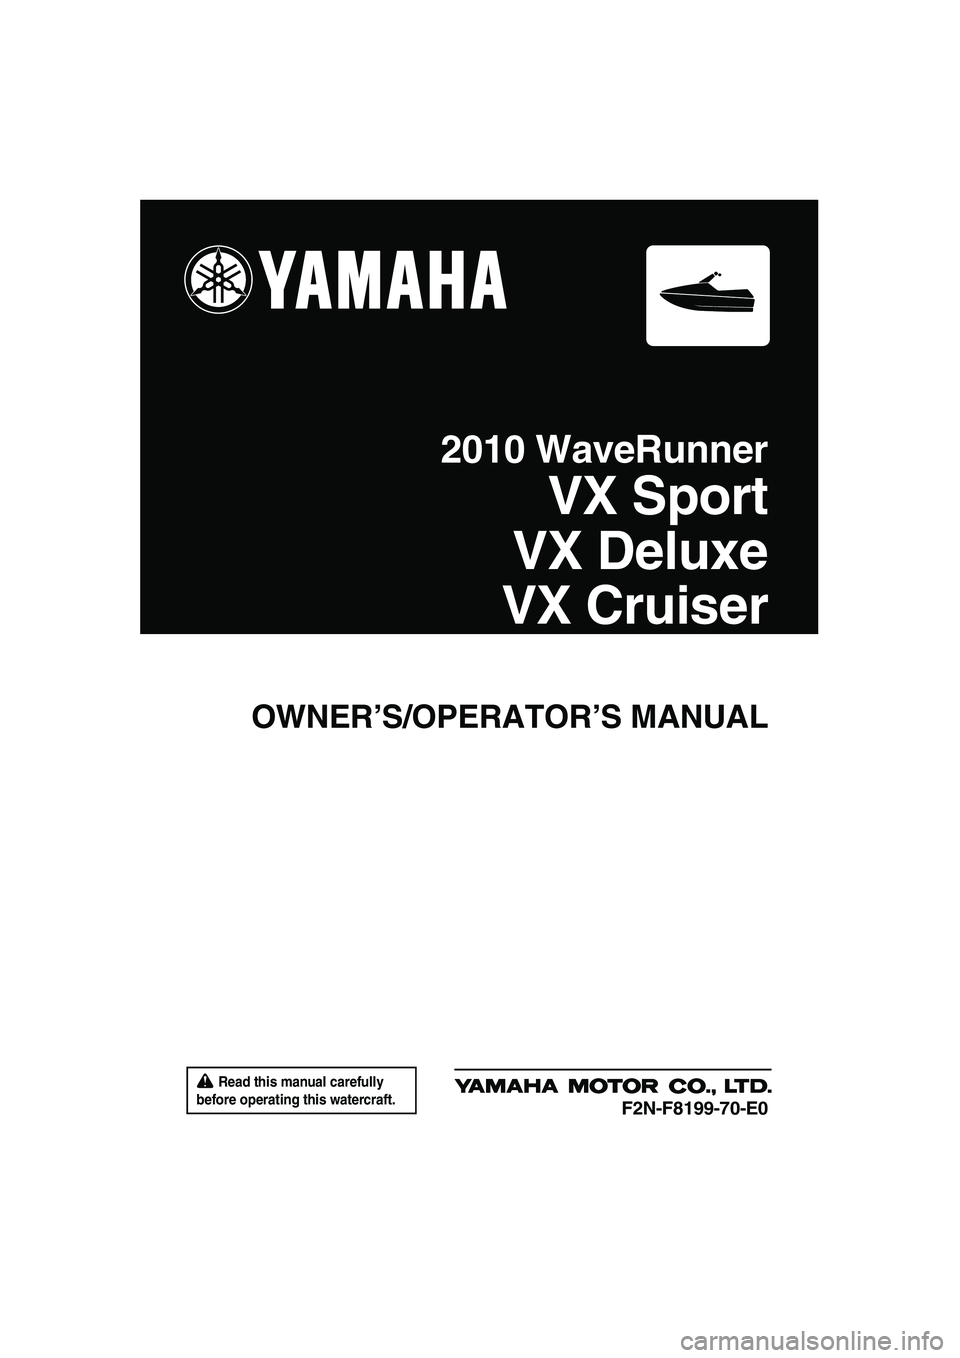 YAMAHA VX DELUXE 2010  Owners Manual  Read this manual carefully 
before operating this watercraft.
OWNER’S/OPERATOR’S MANUAL
2010 WaveRunner
VX Sport
VX Deluxe
VX Cruiser
F2N-F8199-70-E0
UF2N70E0.book  Page 1  Tuesday, October 6, 20